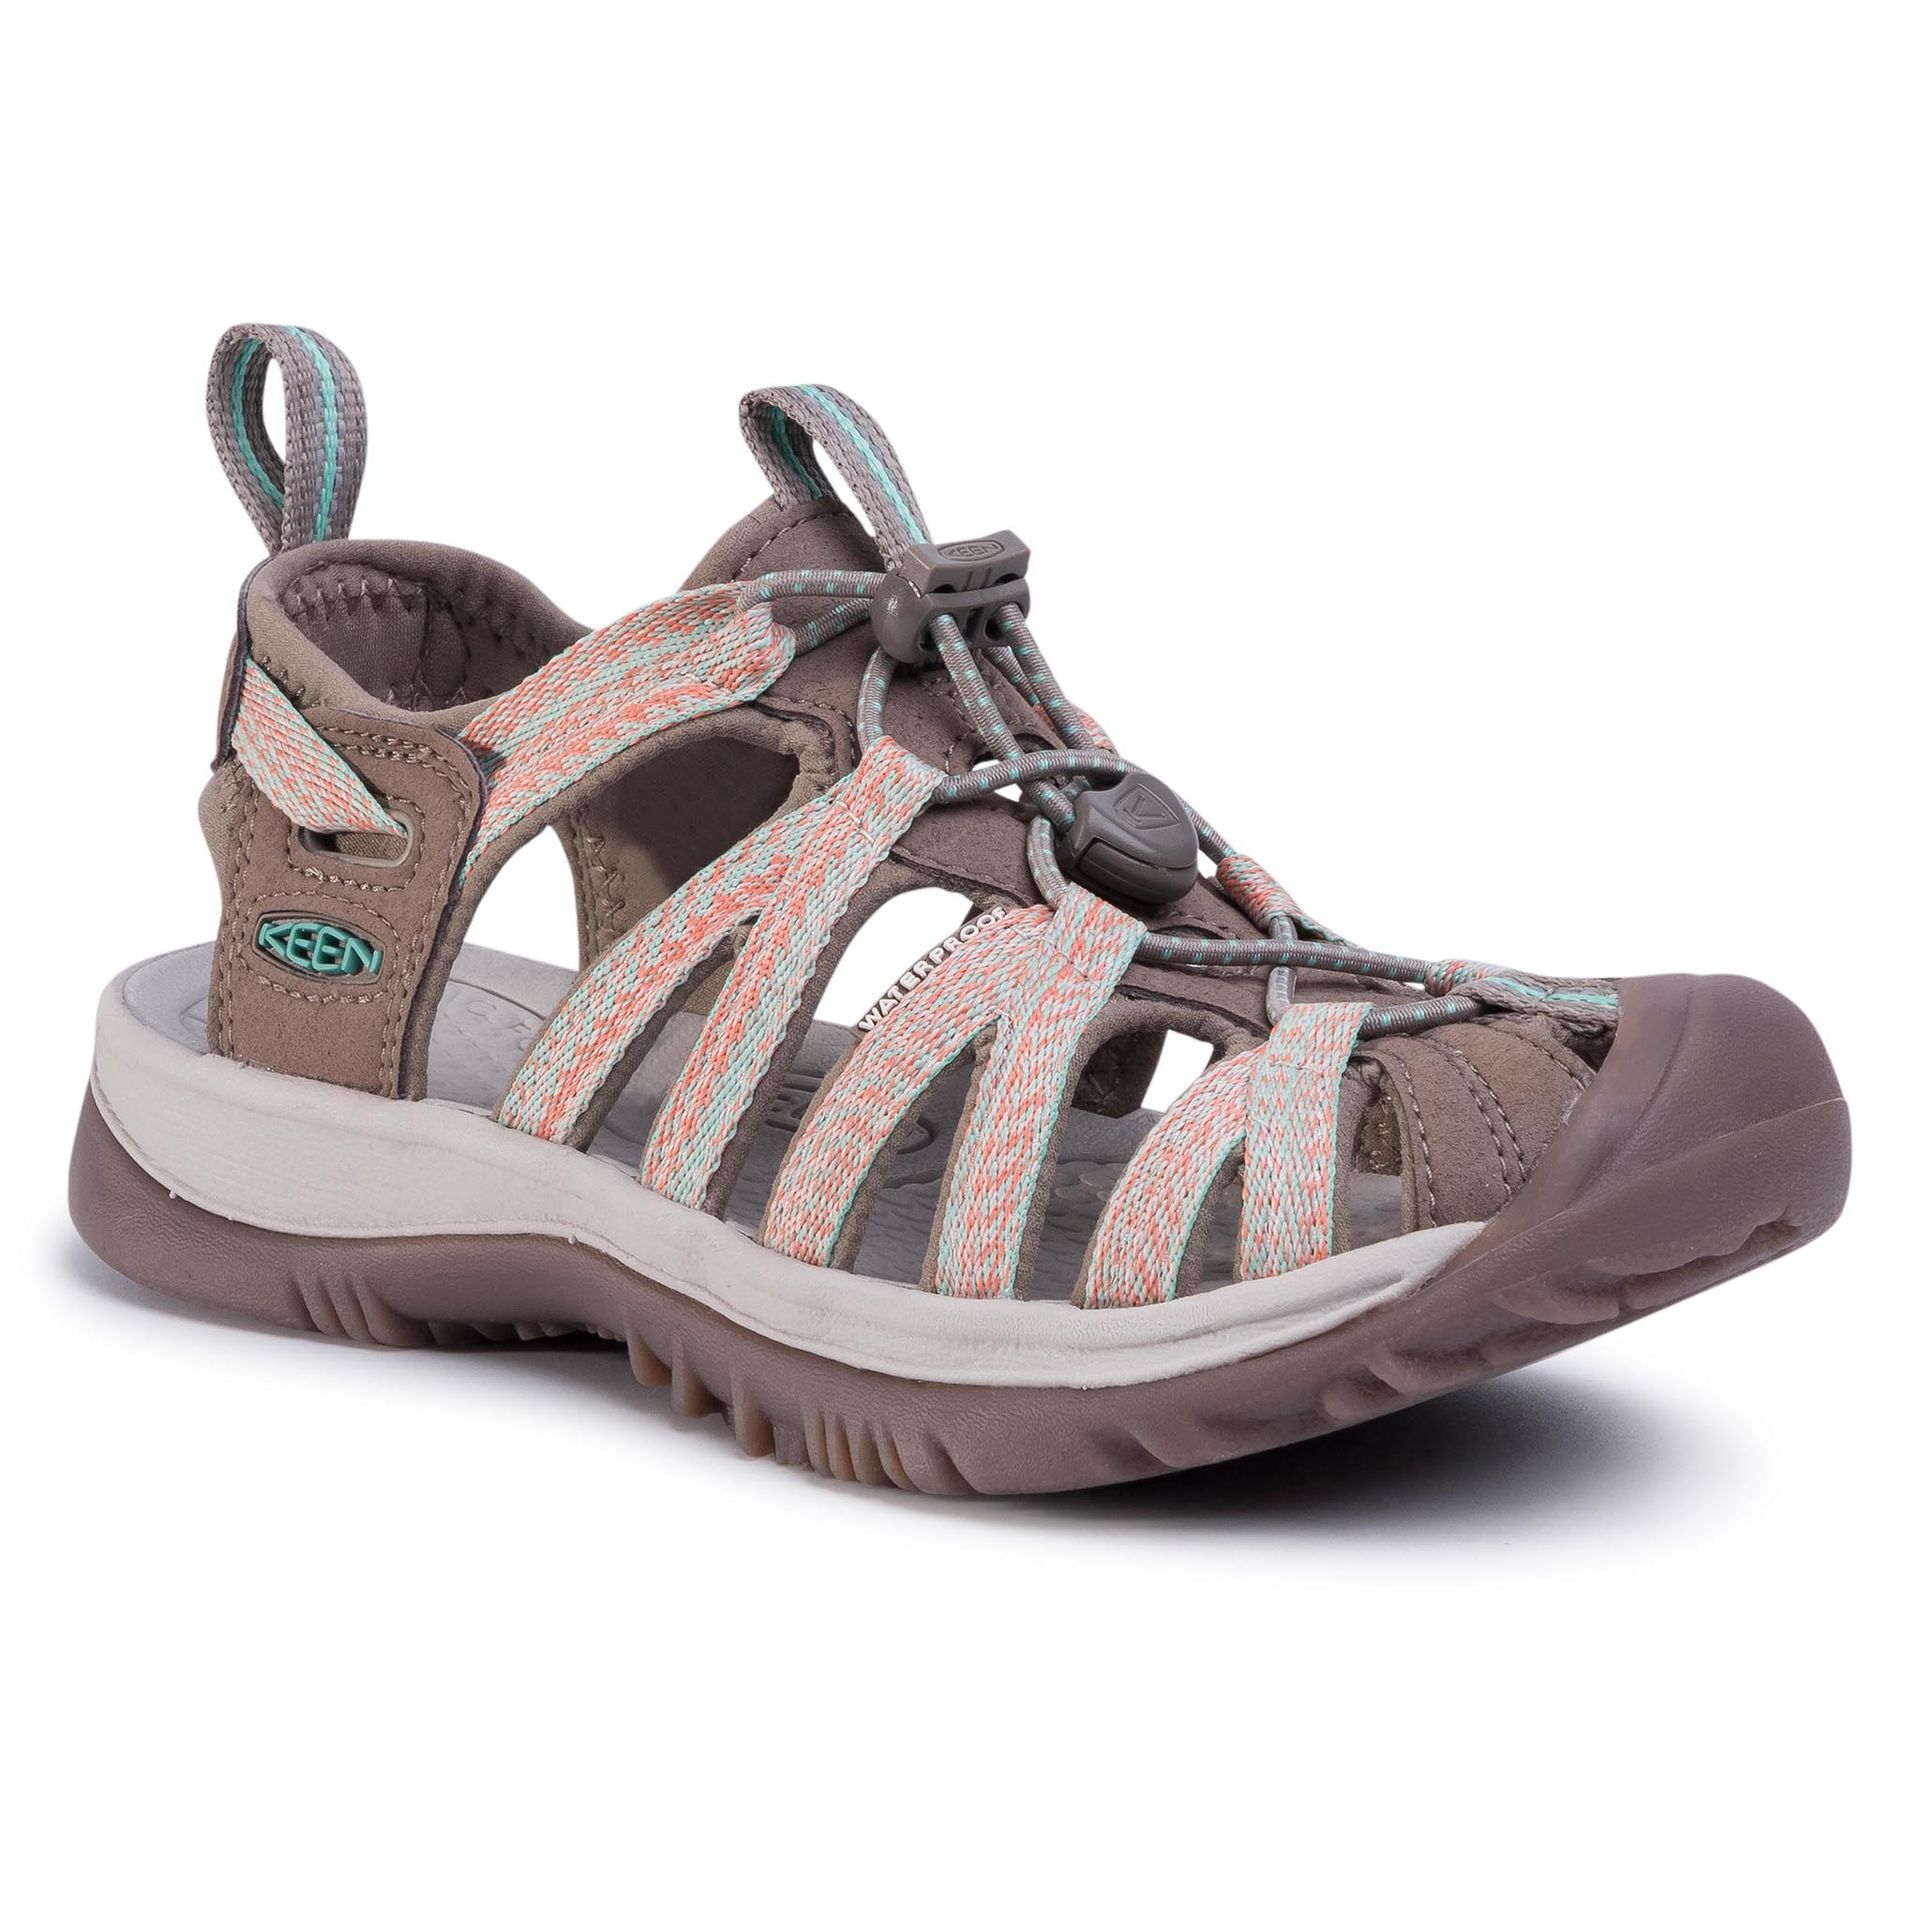 Keen Sandały Whisper 1022810 Taupe/Coral